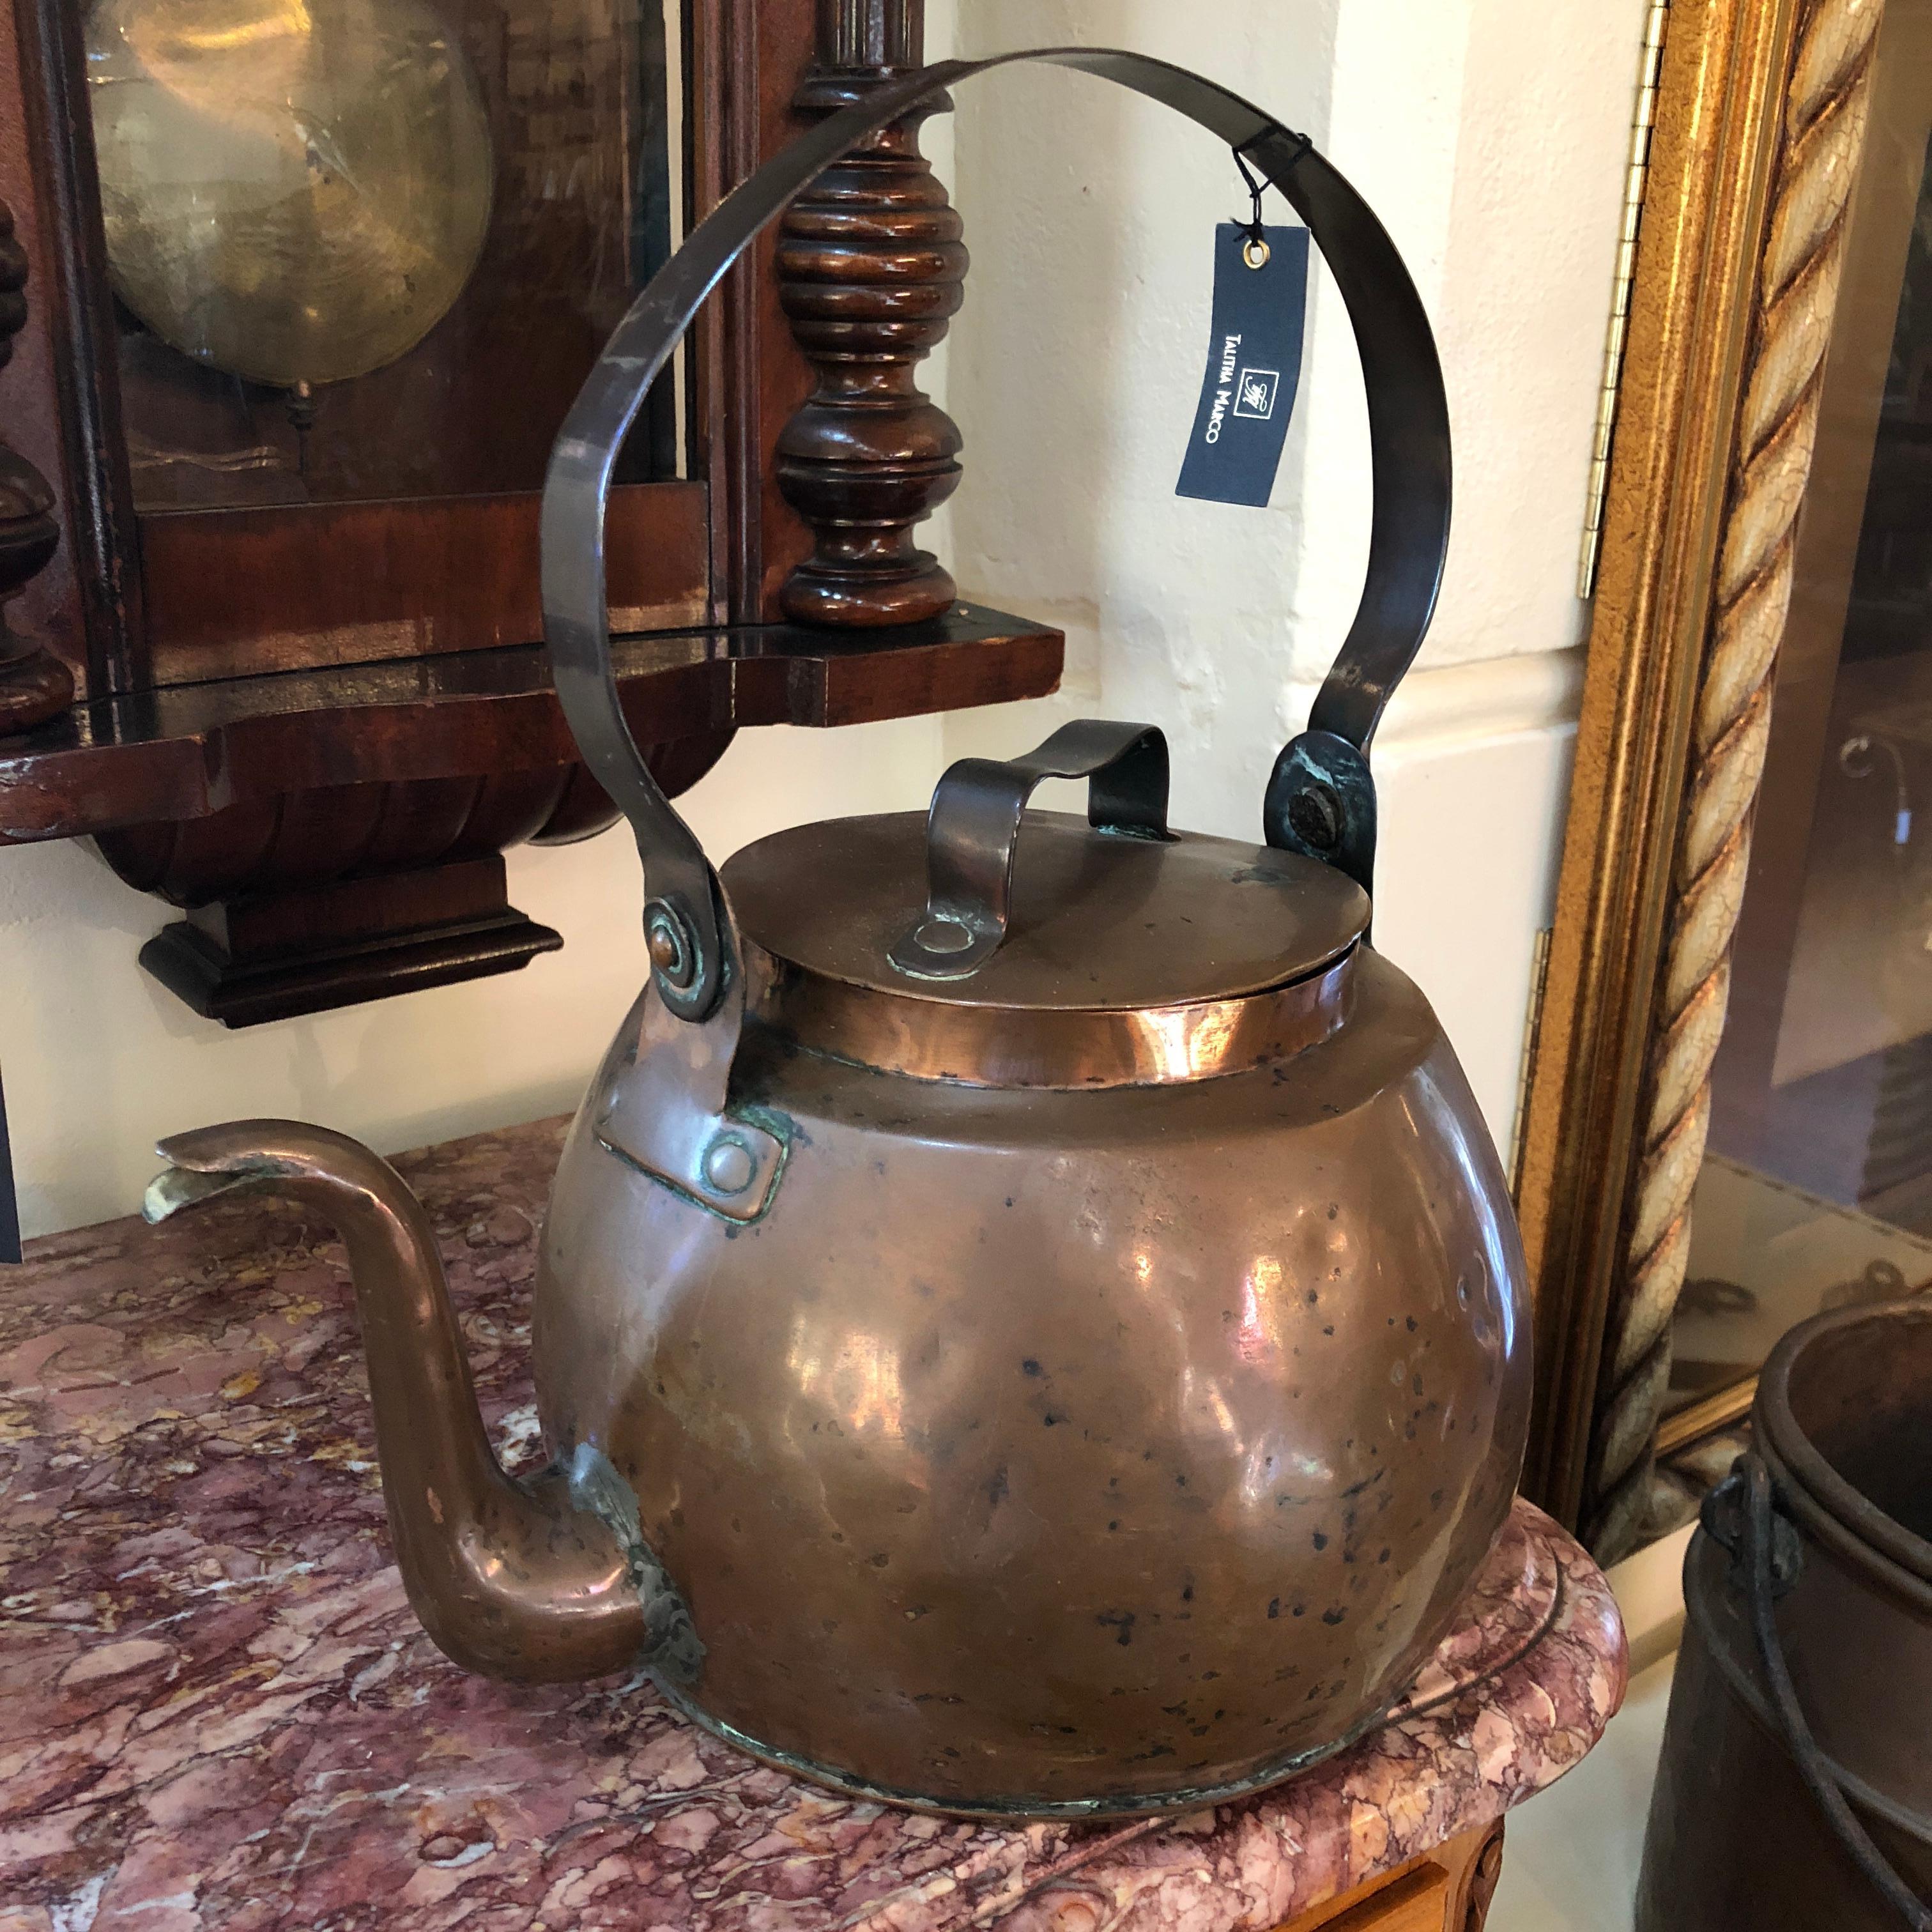 This 19th century French copper kettle is a must have collectable piece for all those kitchenalia collectors out there. Featuring a vert, copper patina with wear and use marks to the outer ‘shell’, this piece would make an exceptional hanging